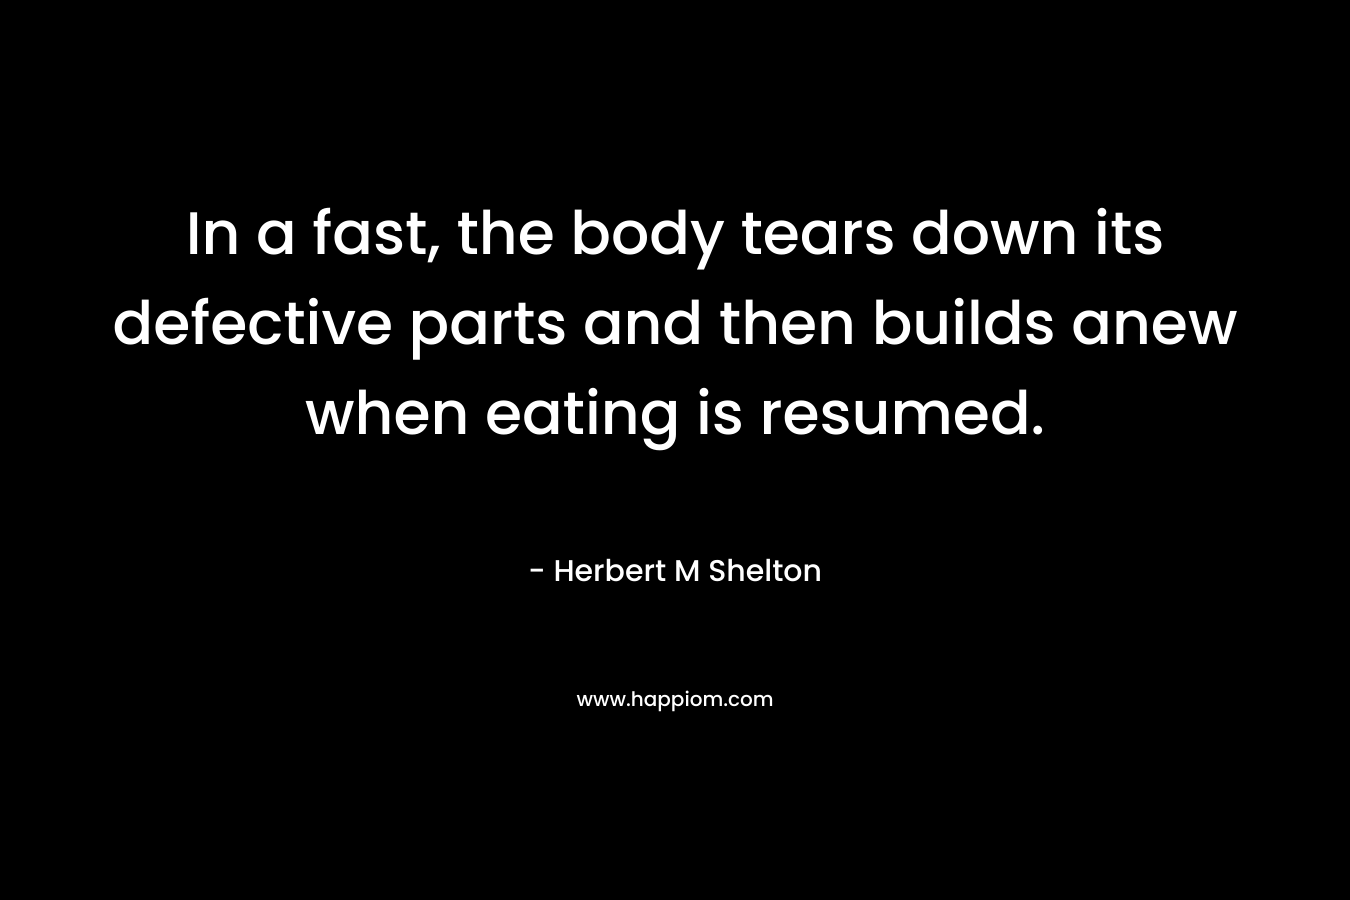 In a fast, the body tears down its defective parts and then builds anew when eating is resumed.